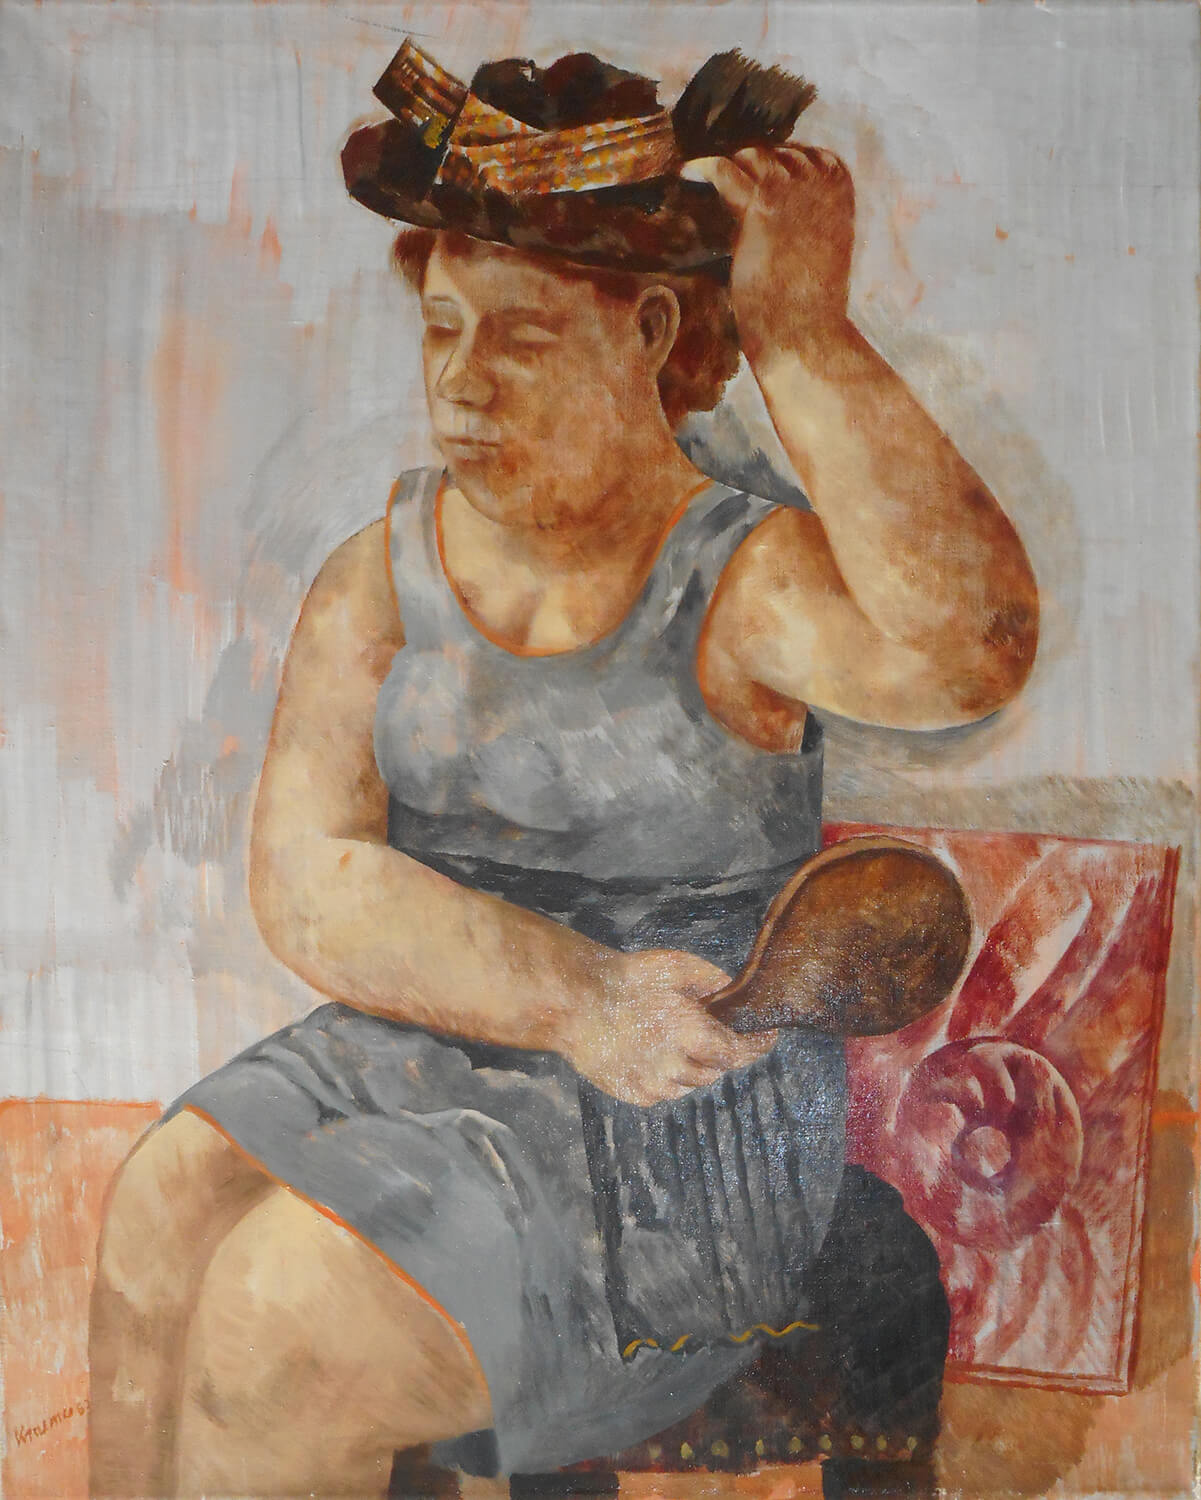 Dieter Kraemer, Woman with Hat and Mirror, 1968, oil on canvas, 100 x 80 cm